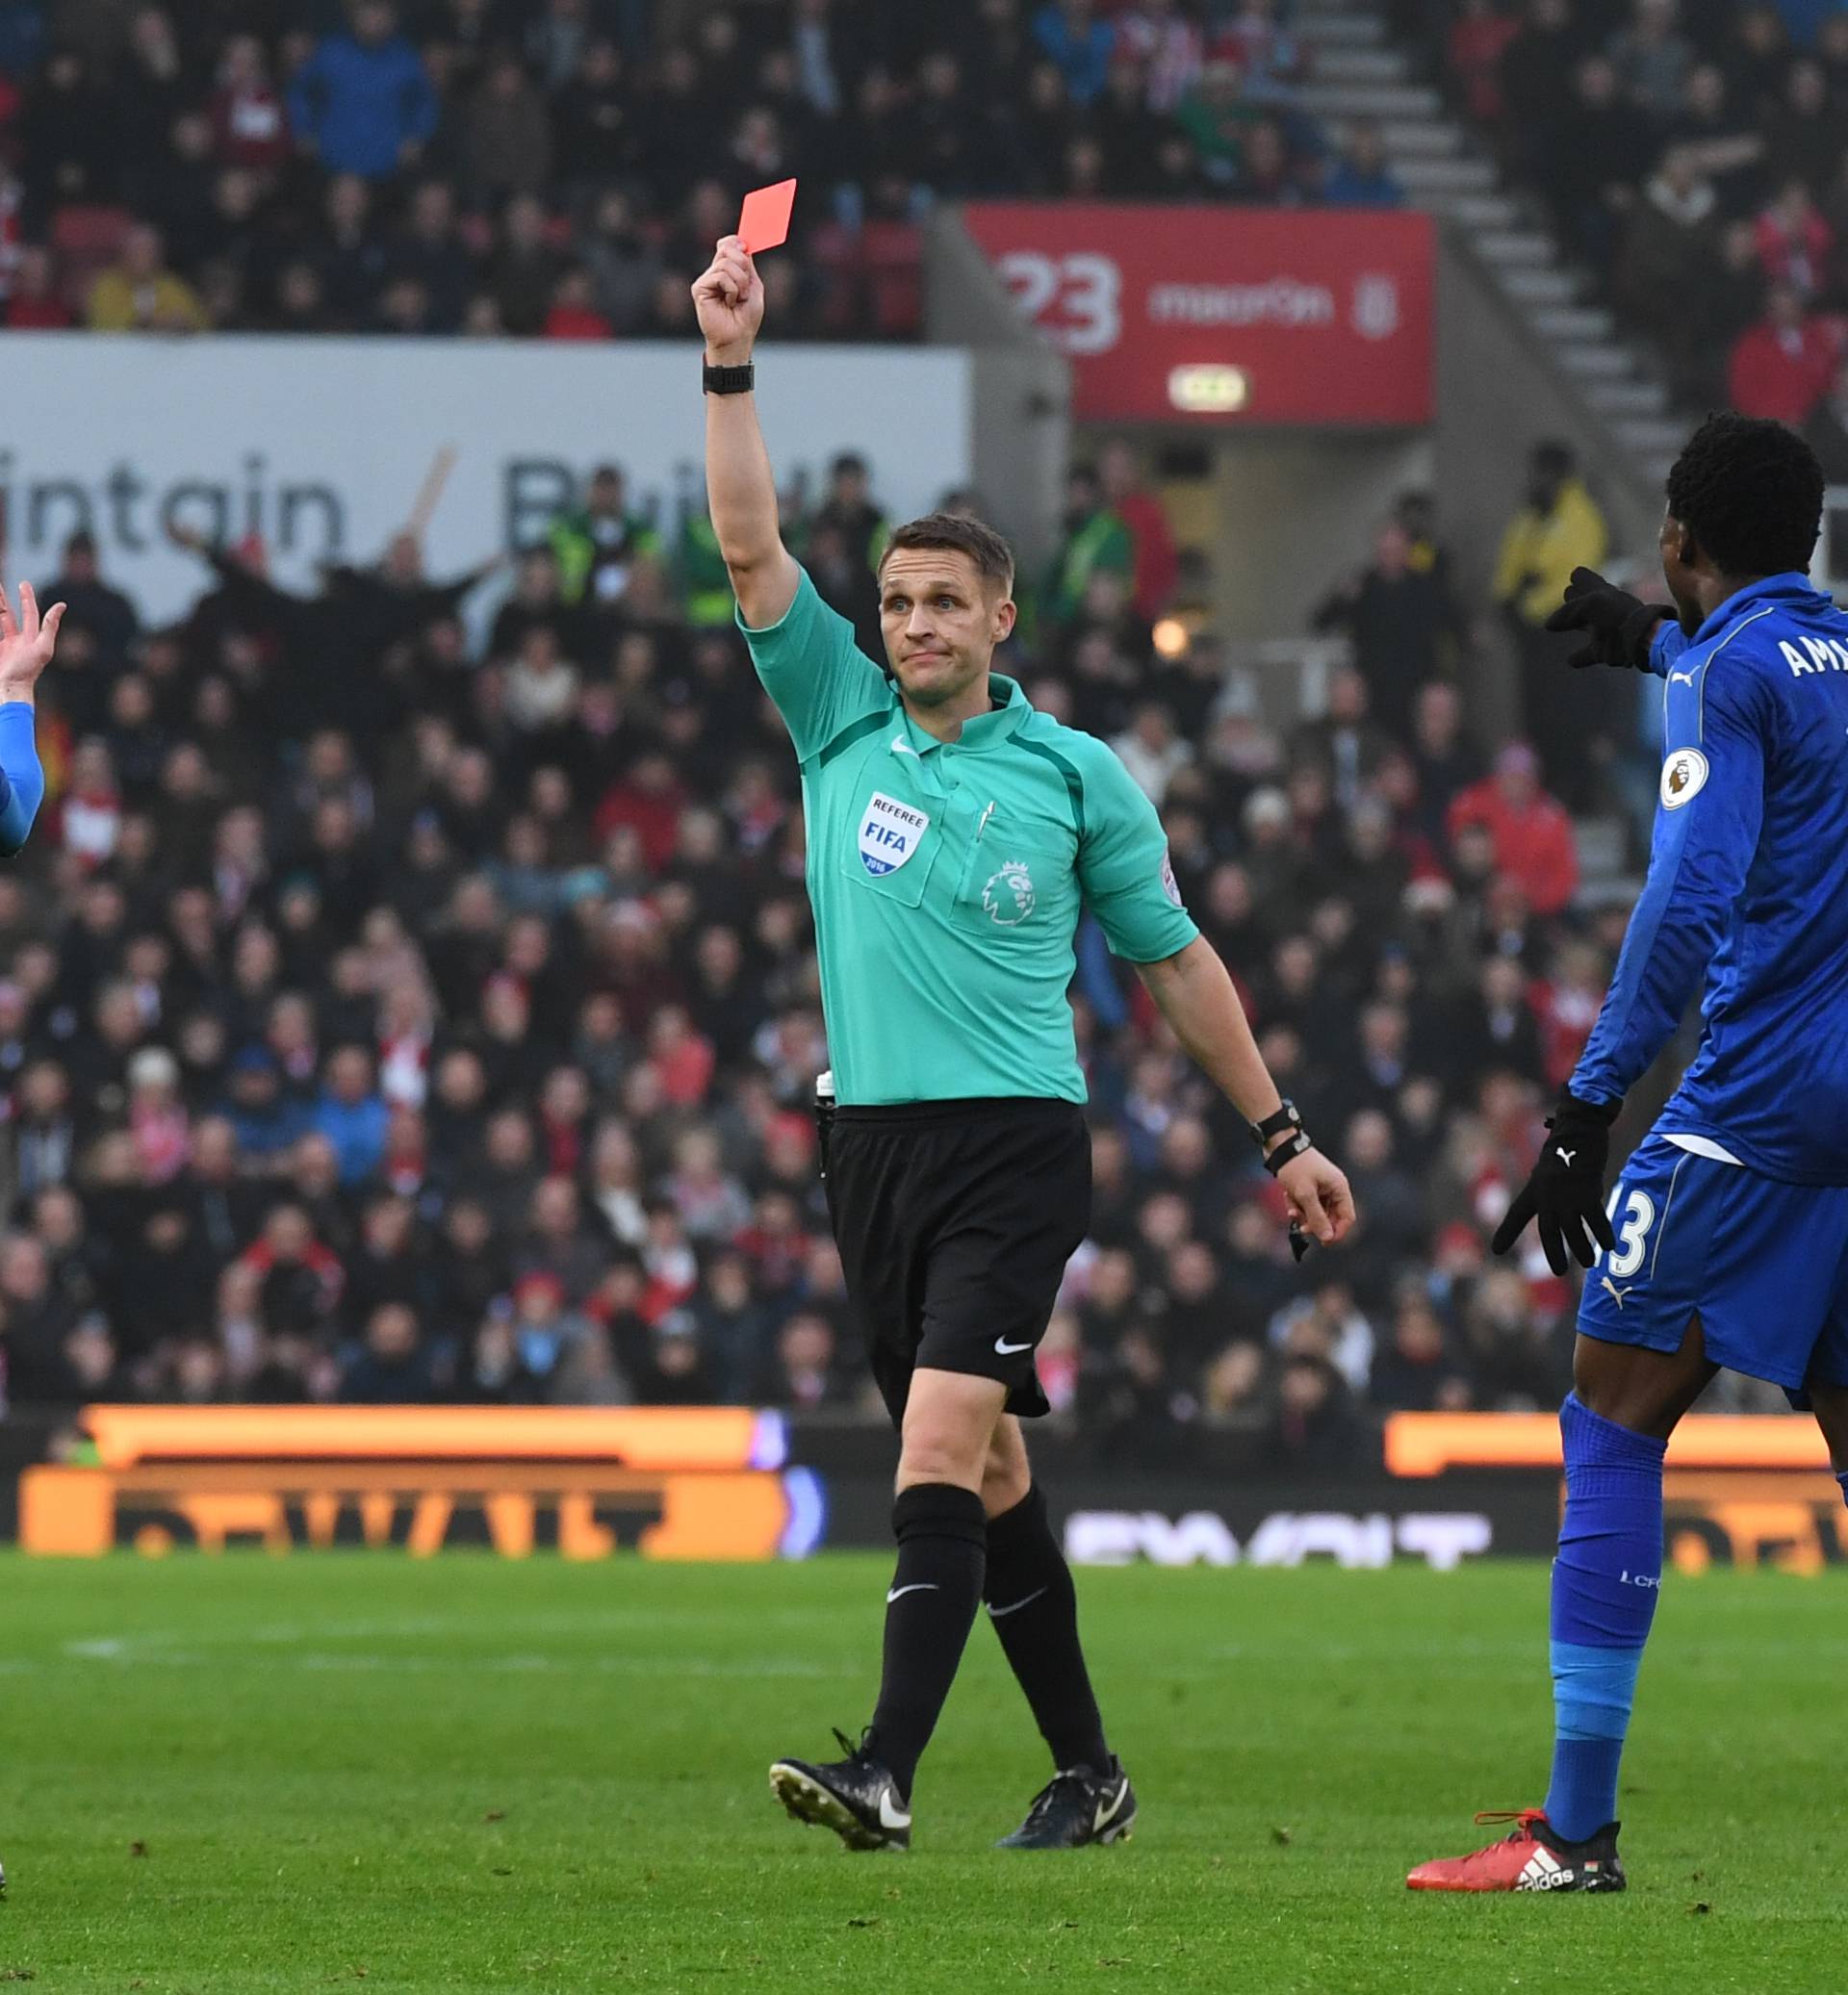 Leicester City's Jamie Vardy is shown a red card by referee Craig Pawson